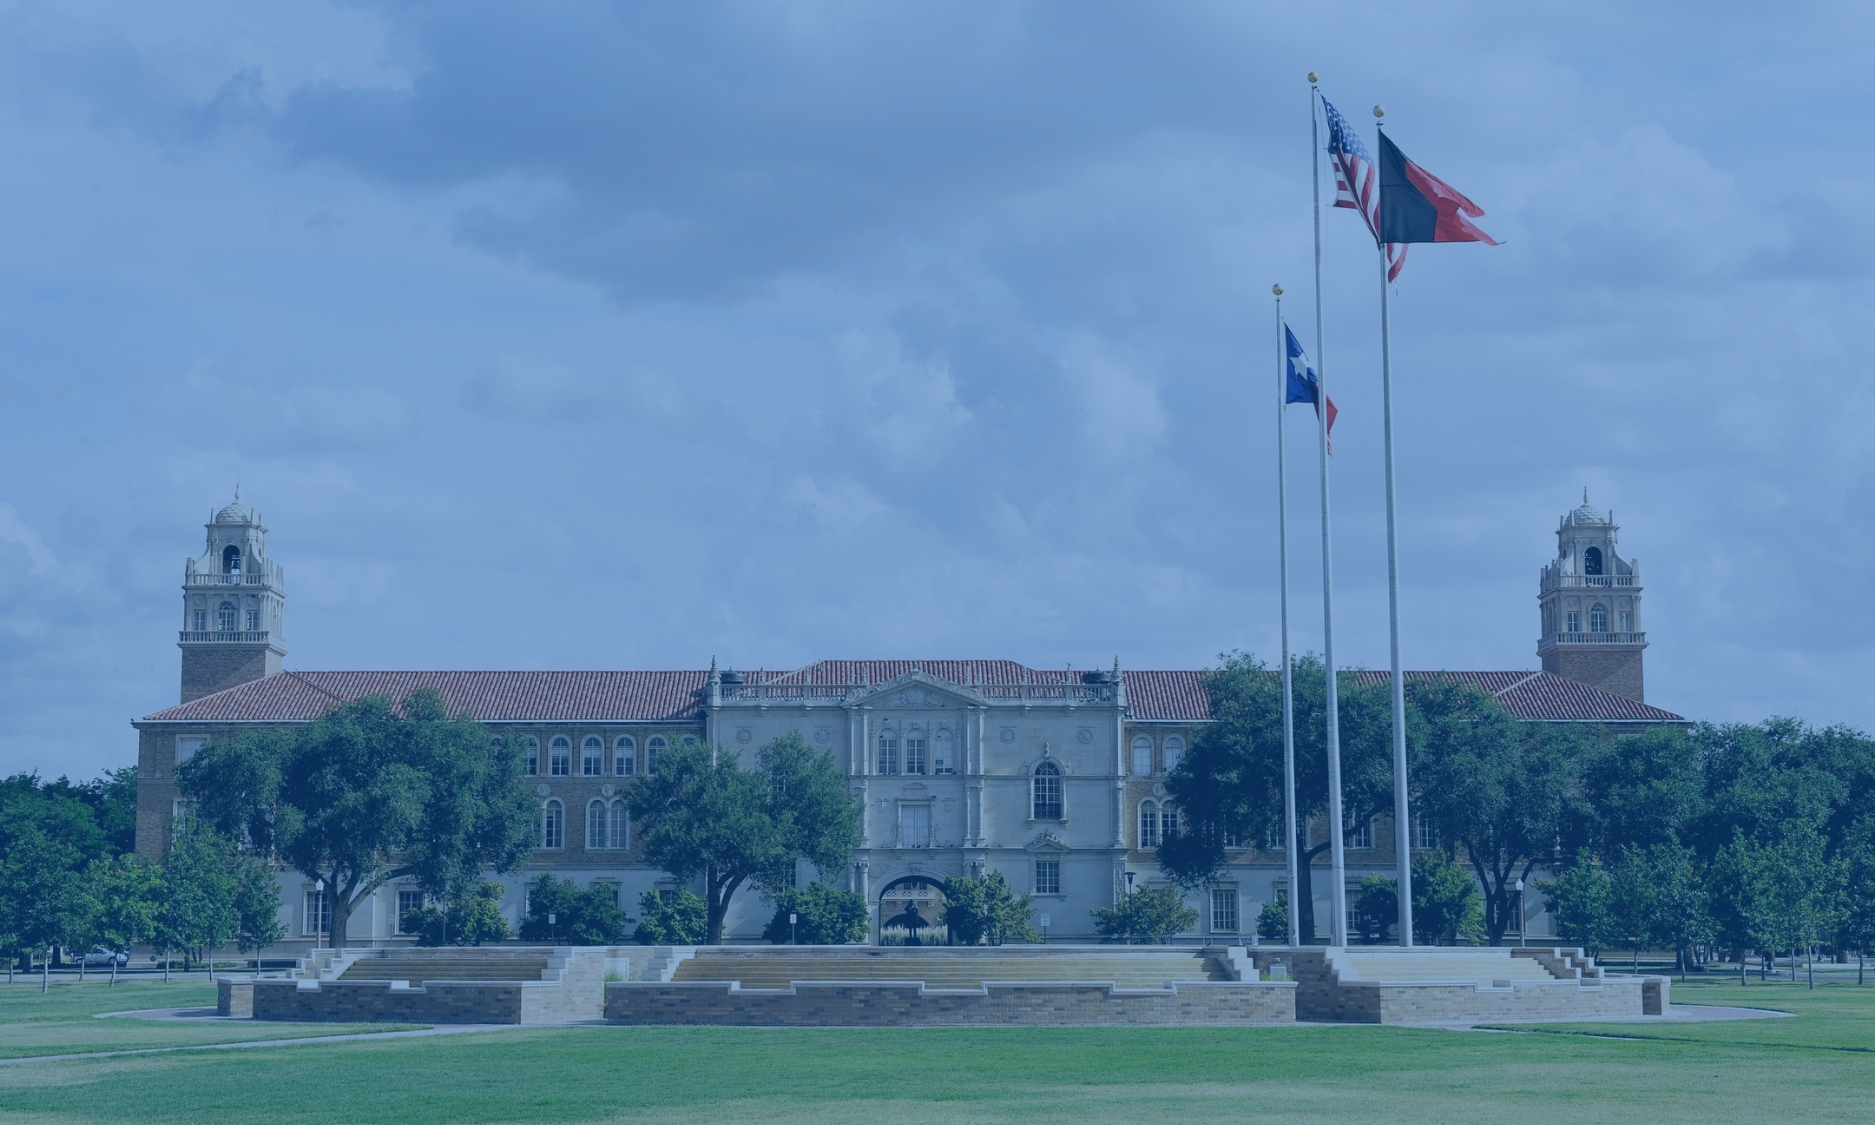 Texas Tech University Small and Historically Underutilized Business Expo